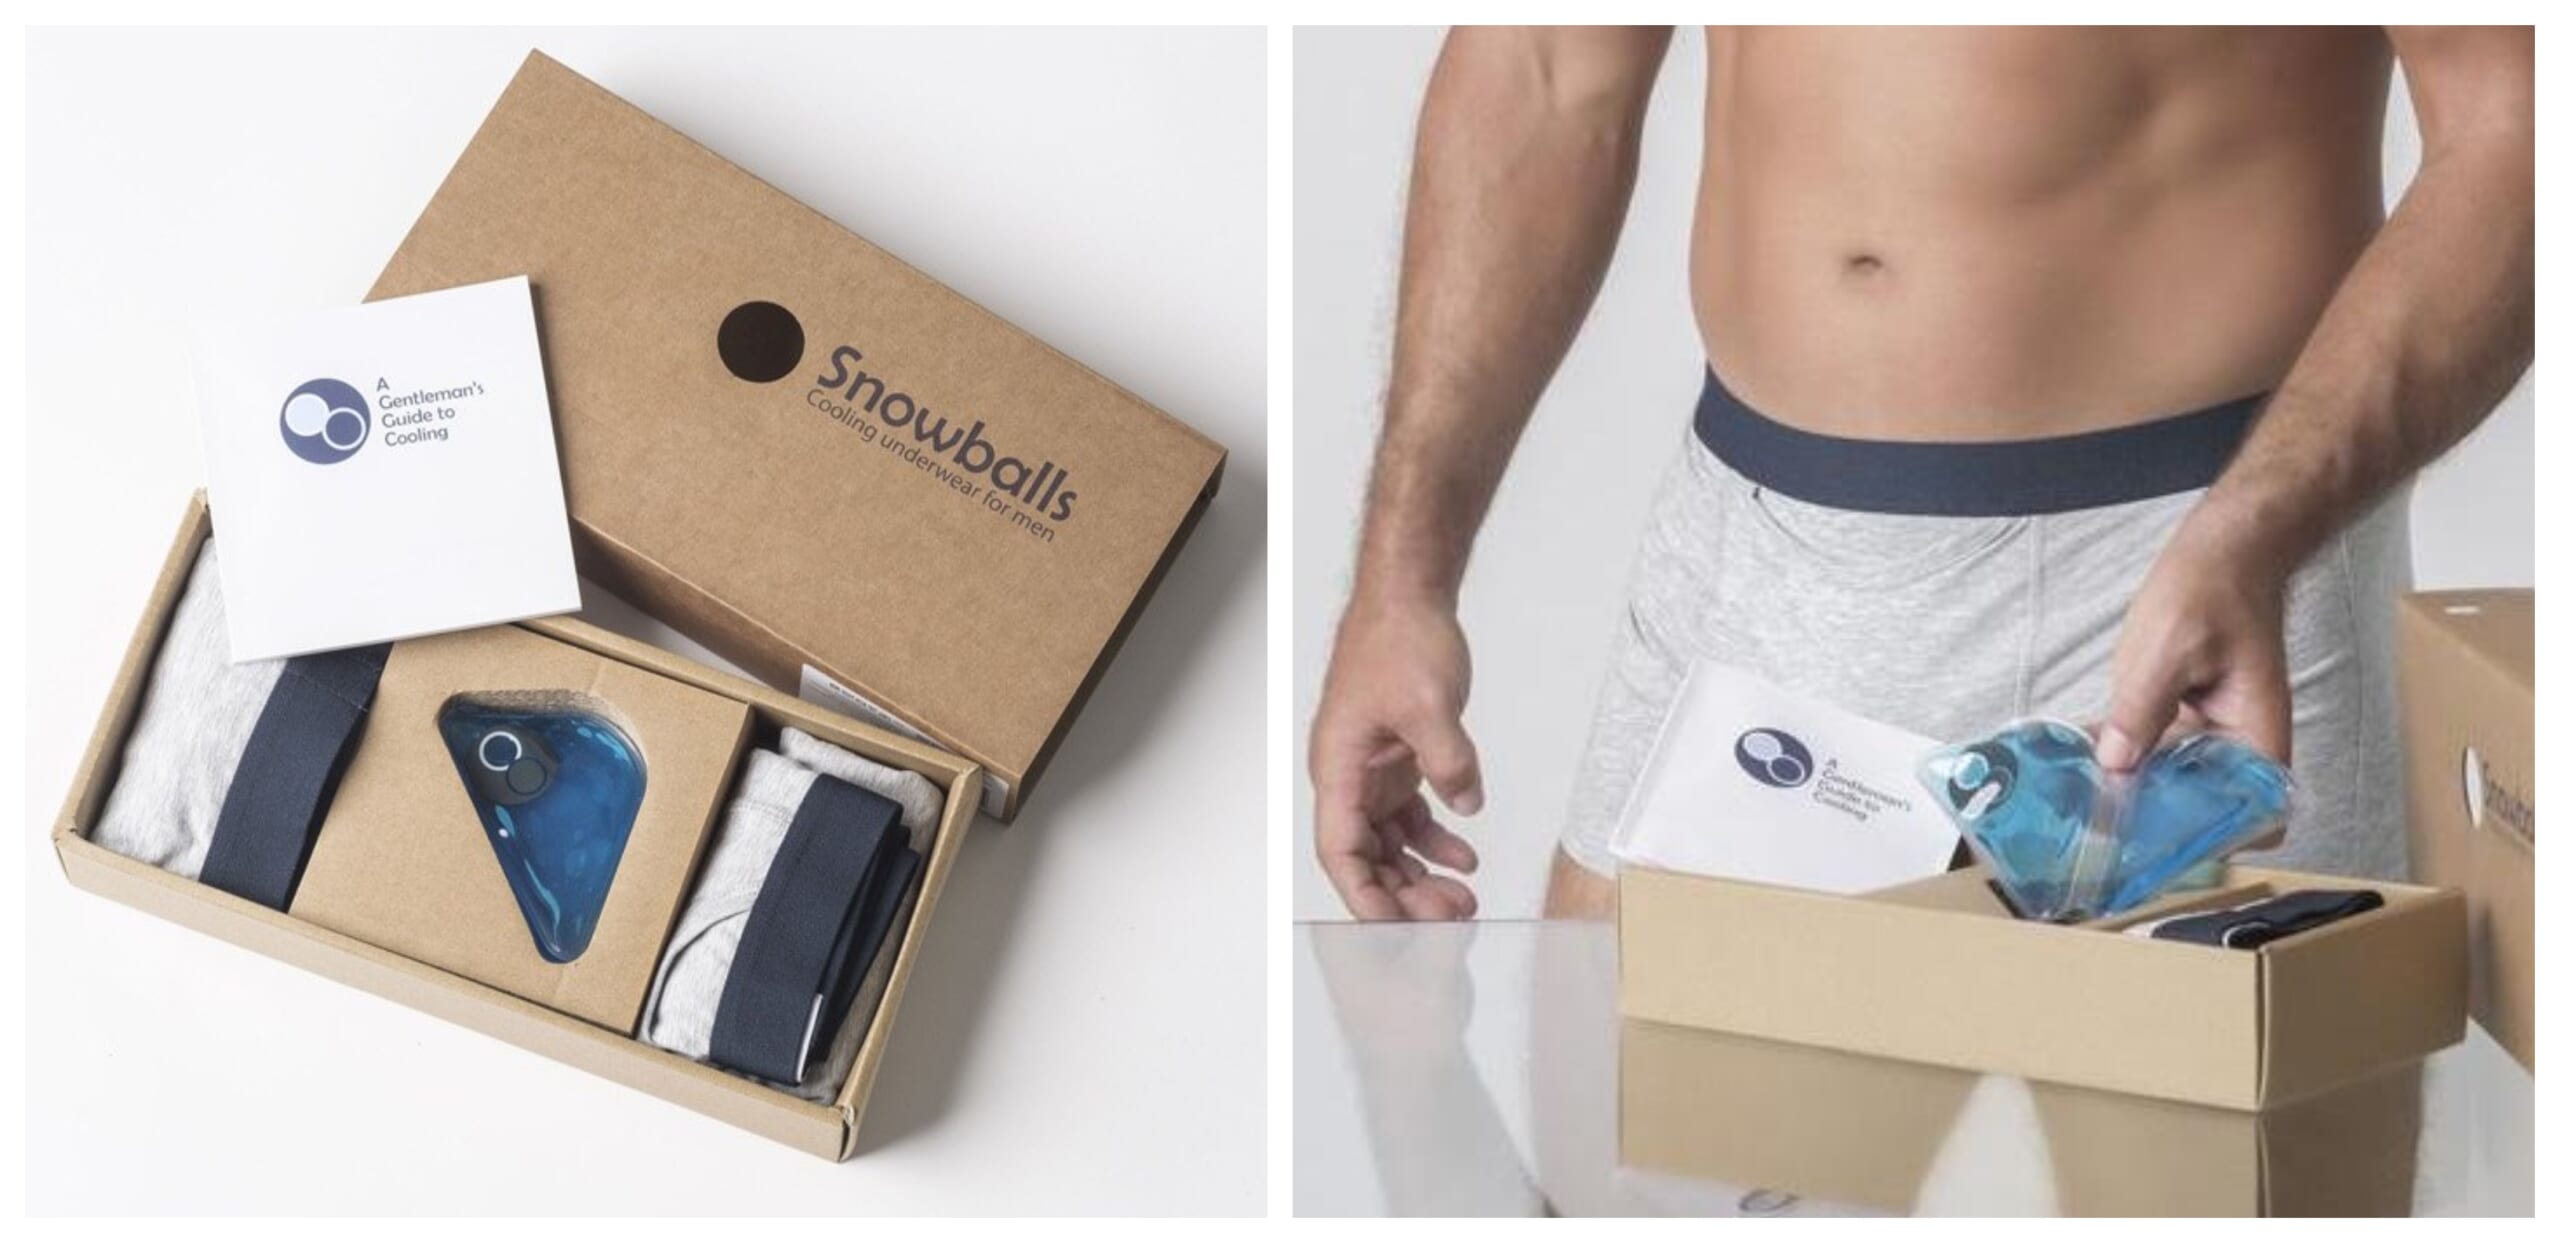 Buy Snowballs Cooling Underwear for Men at